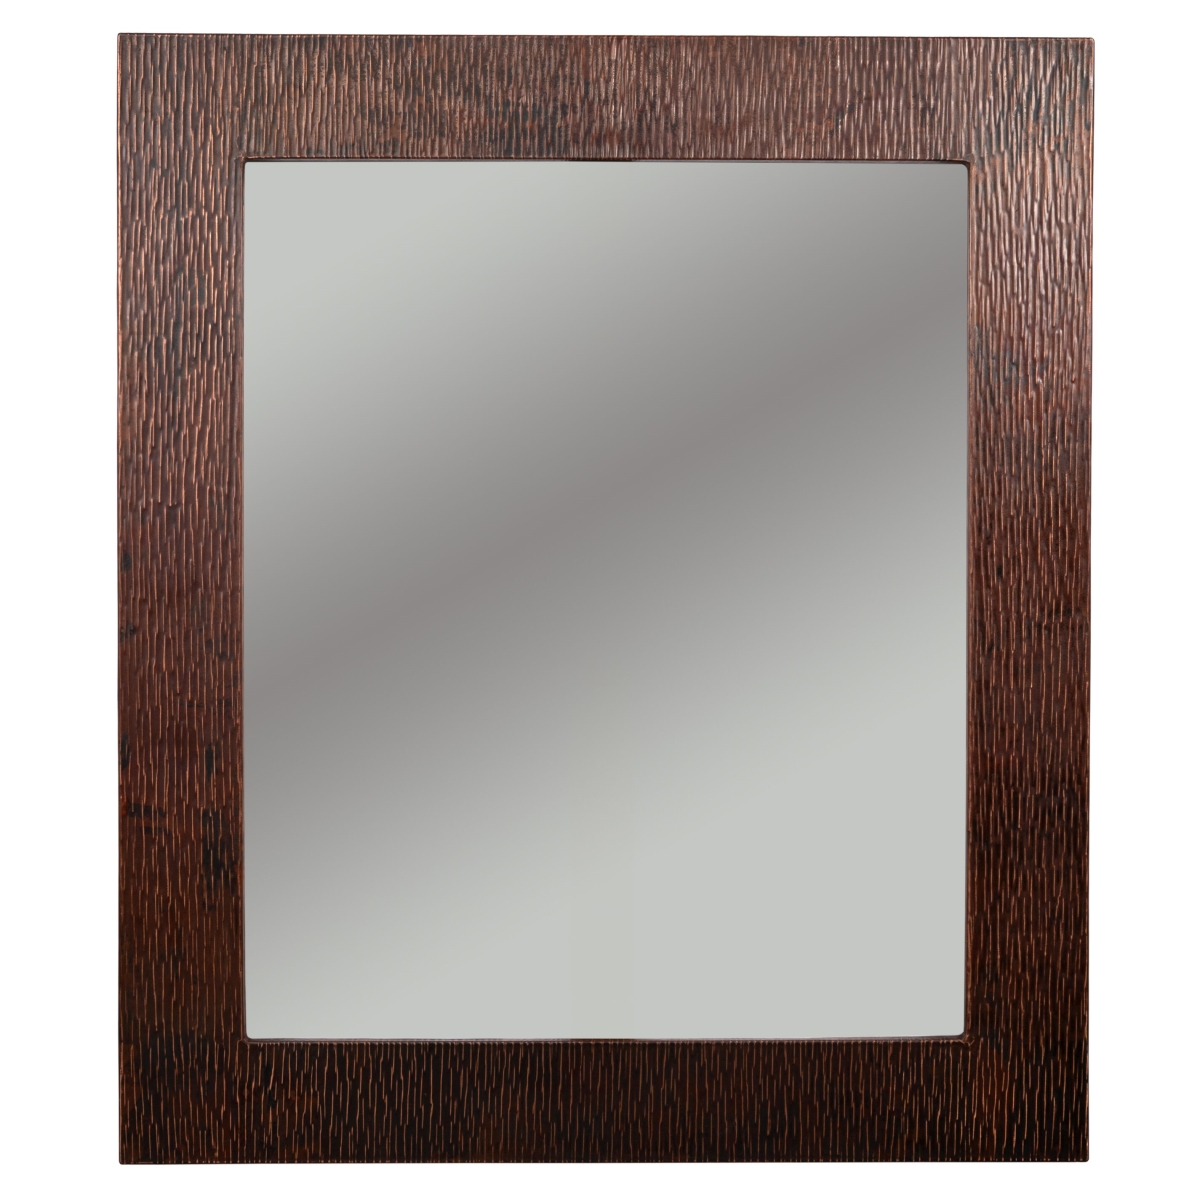 Mfrec3631-tr 36 In. Hand Hammered Rectangle Copper Mirror With Tree Design - Oil Rubbed Bronze